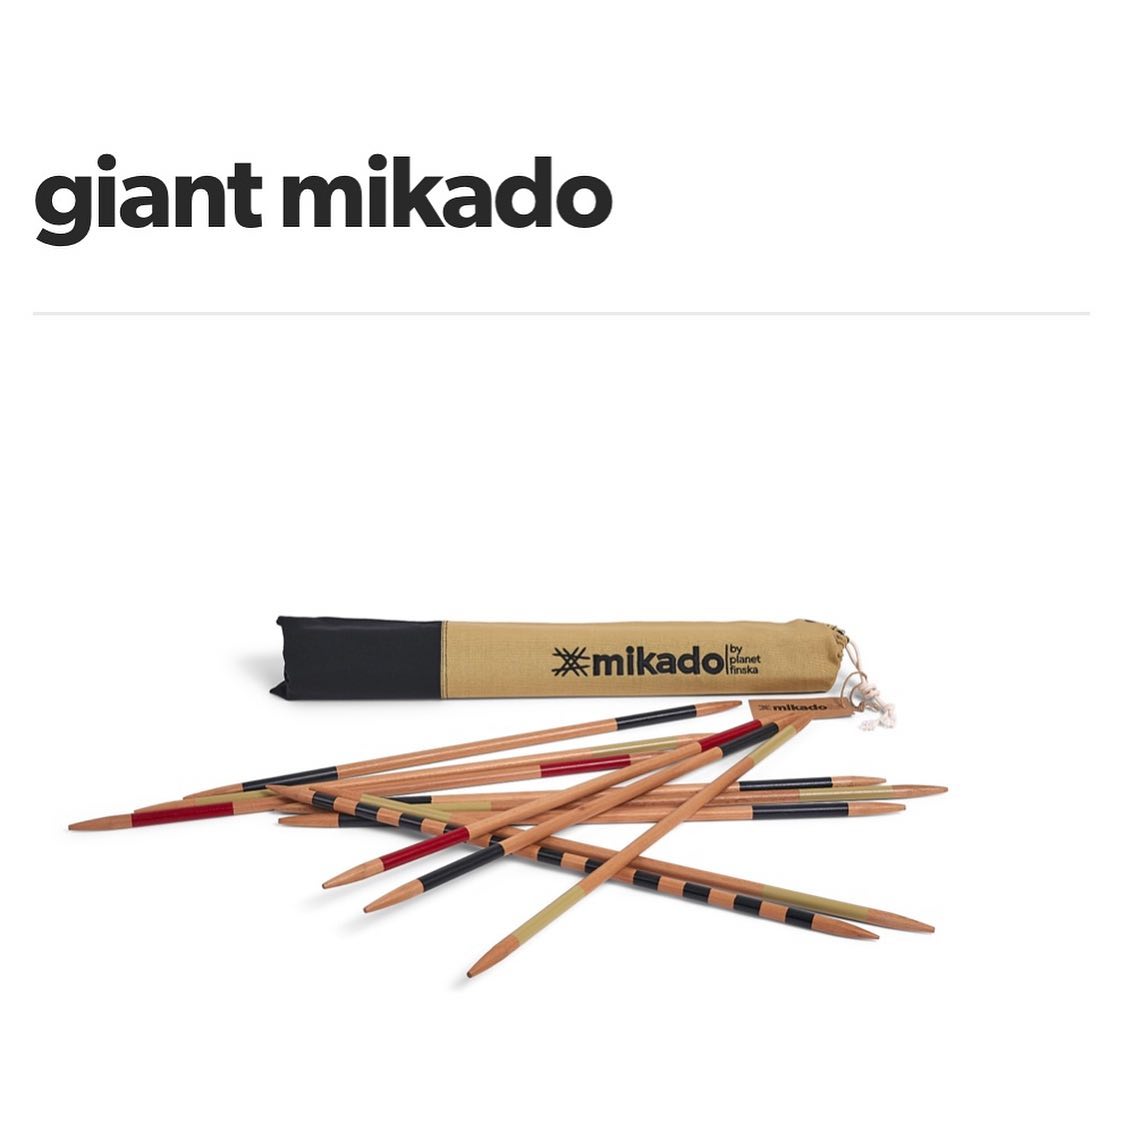 Giant Mikado Wooden Sticks — Outdoor Products In Central Highlands, QLD